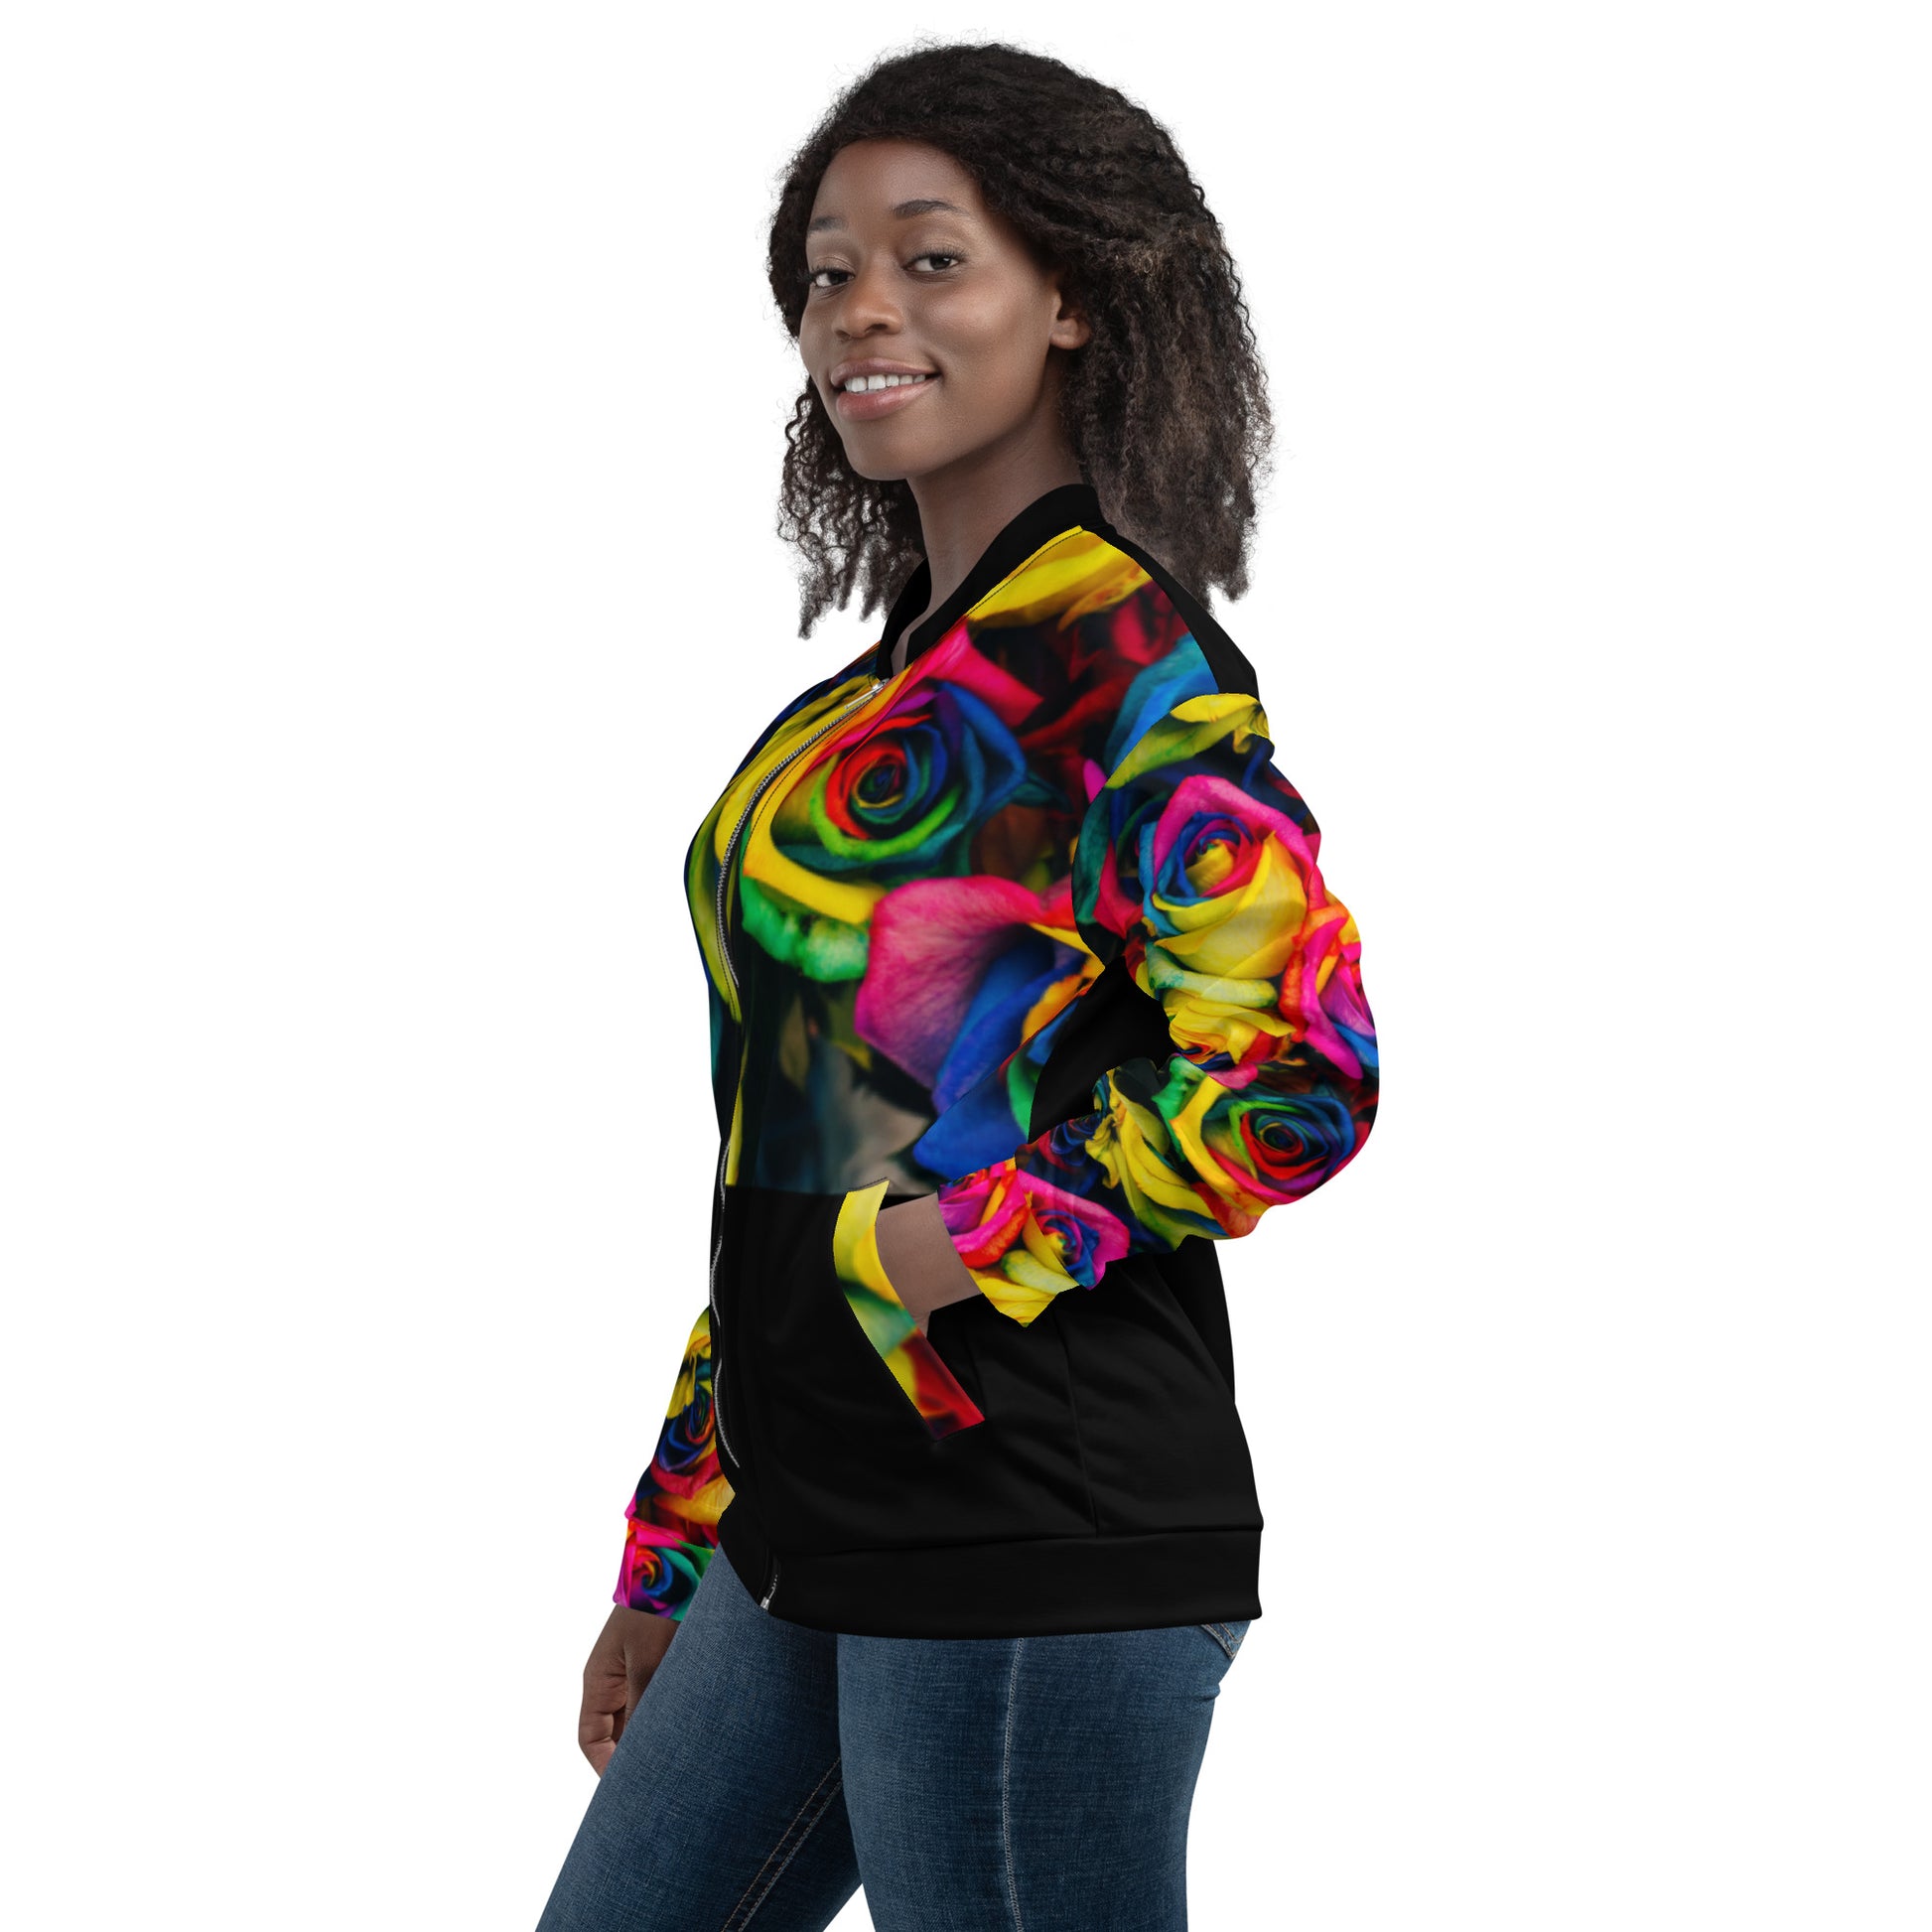 Moonlight & Roses Unisex Bomber Jacket - Full Sleeves from the Bravo & Roses Collection - Because artists deserve praise!  Gift yourself SpotlYght Seeker. You've earned it.  Let this statement piece be a  symbol of self-praise and empowerment, a perfect gift to yourself.